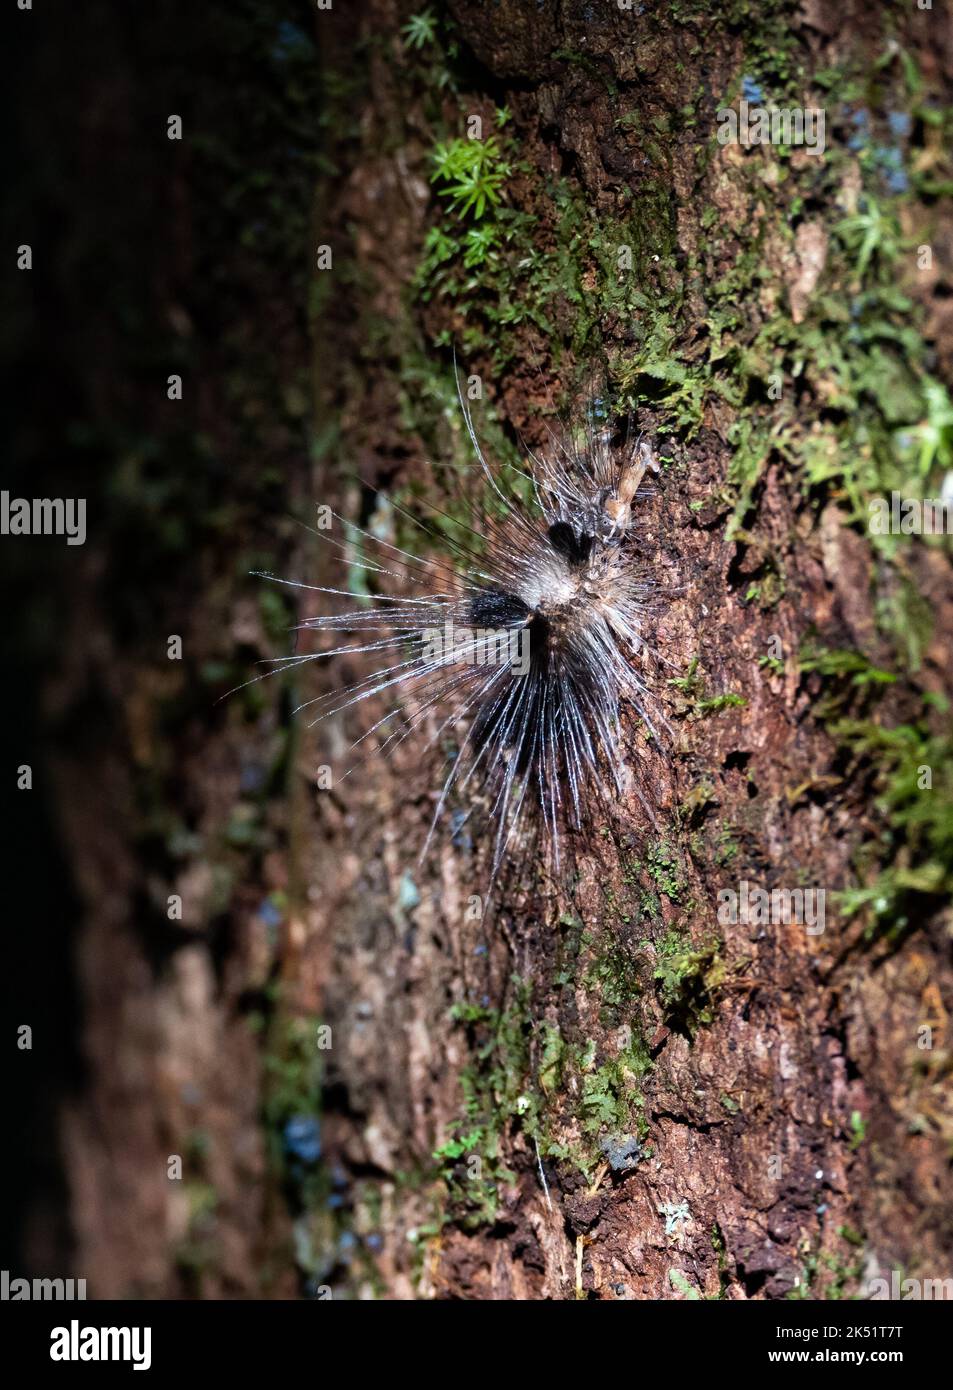 A hairy caterpillar () on a tree trunk in tropical forest. Amazonas, Brazil. Stock Photo